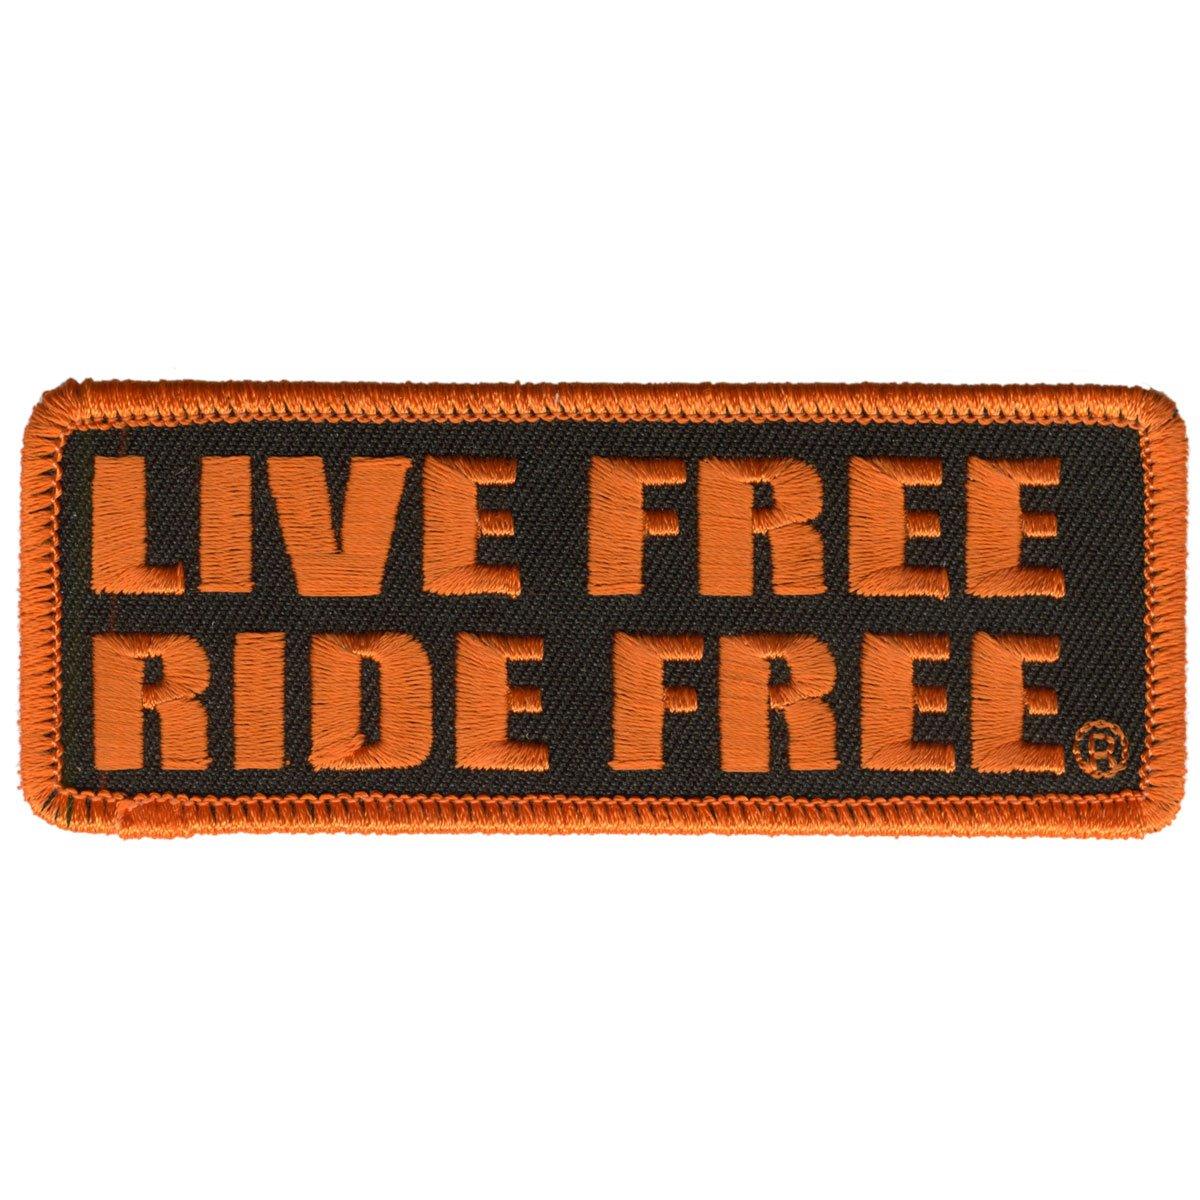 Hot Leathers Live Free Ride Free 4" X 2" Patch - American Legend Rider